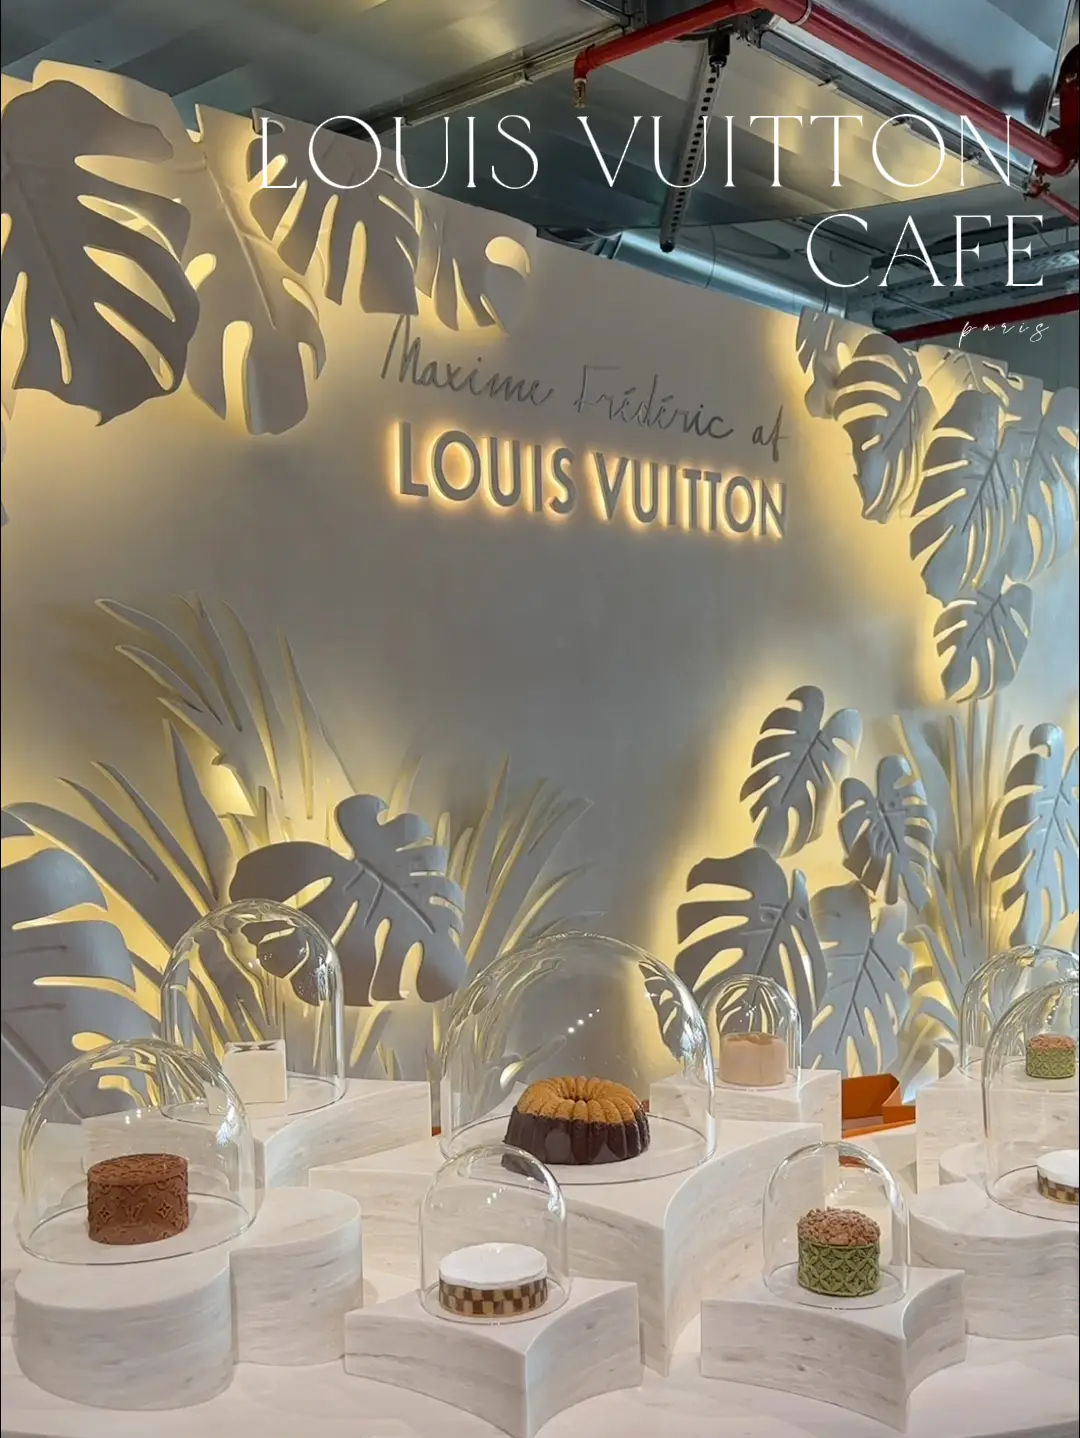 I have found Heaven 🇫🇷 Louis Vuitton Chocolate Shop & Cafe